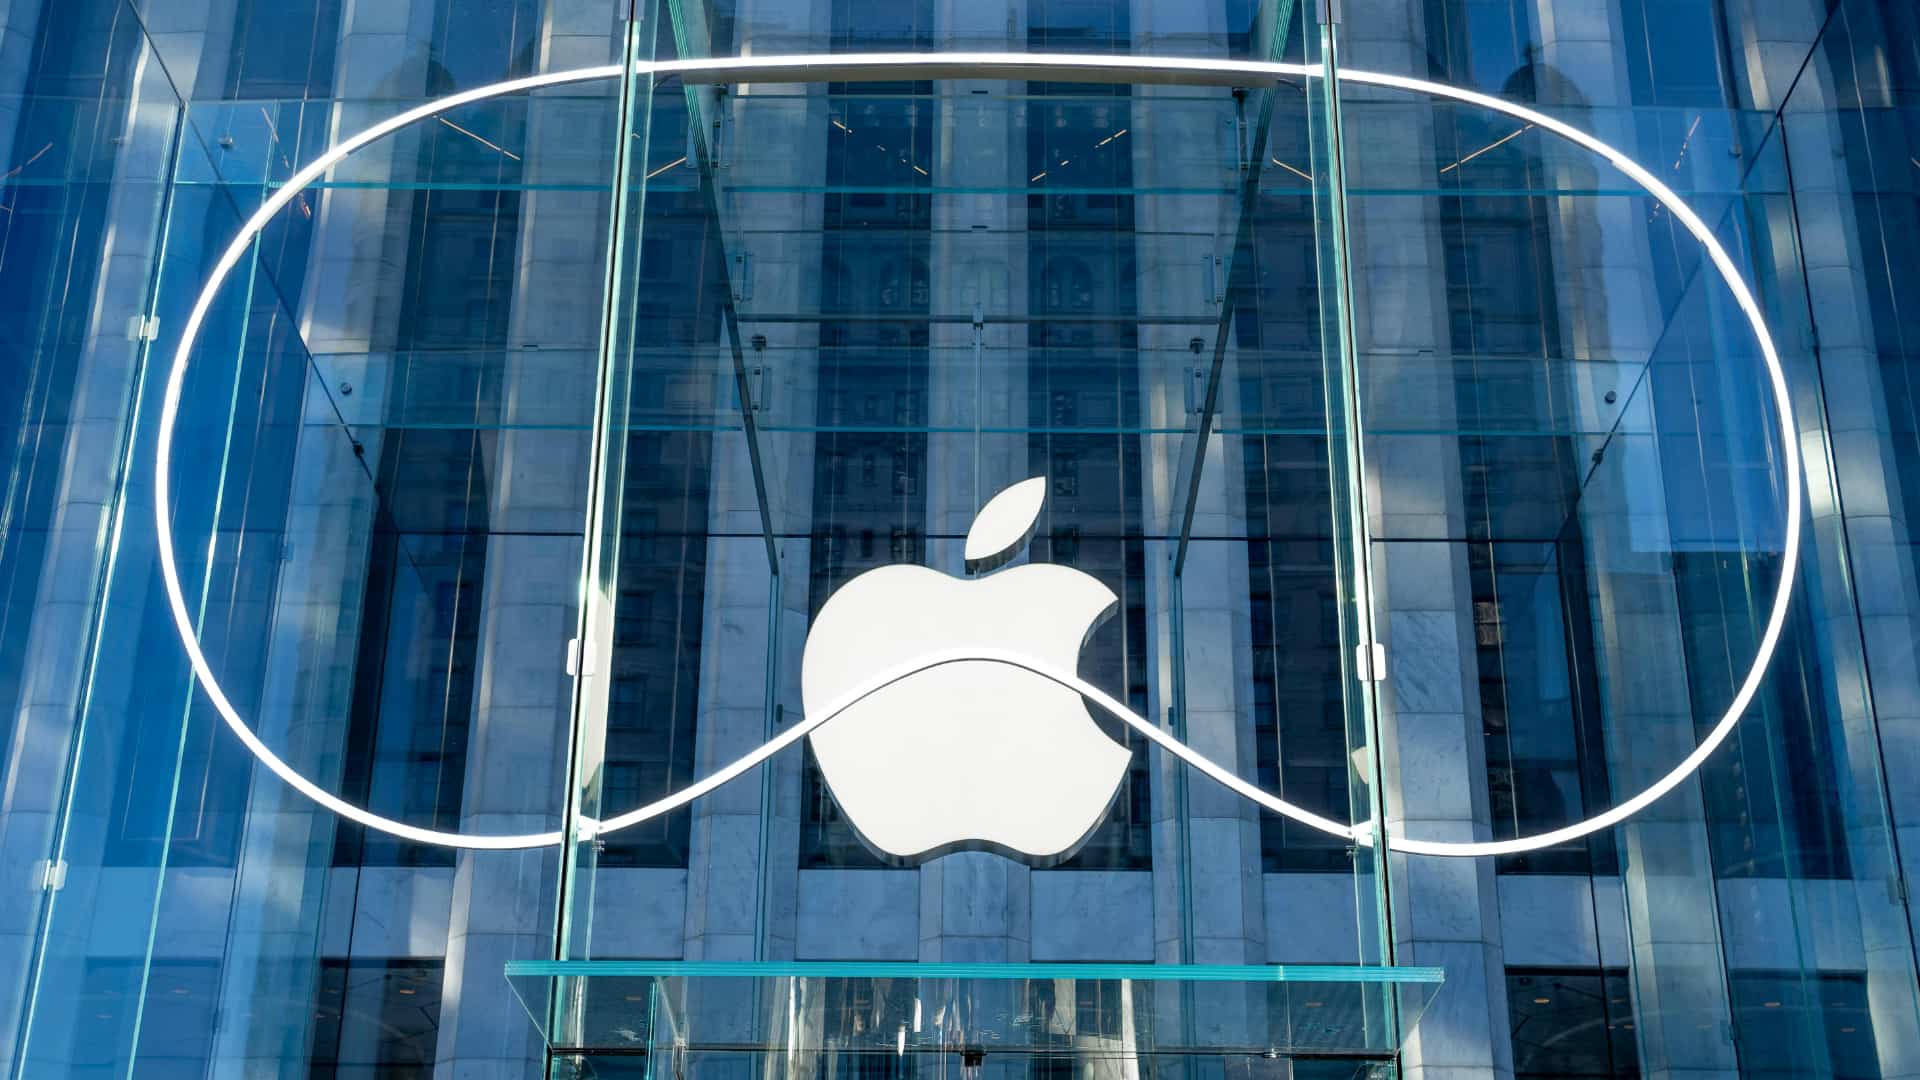 Vision Pro logo in front of the iconic Apple Store glass cube store on Fifth Avenue in New York.